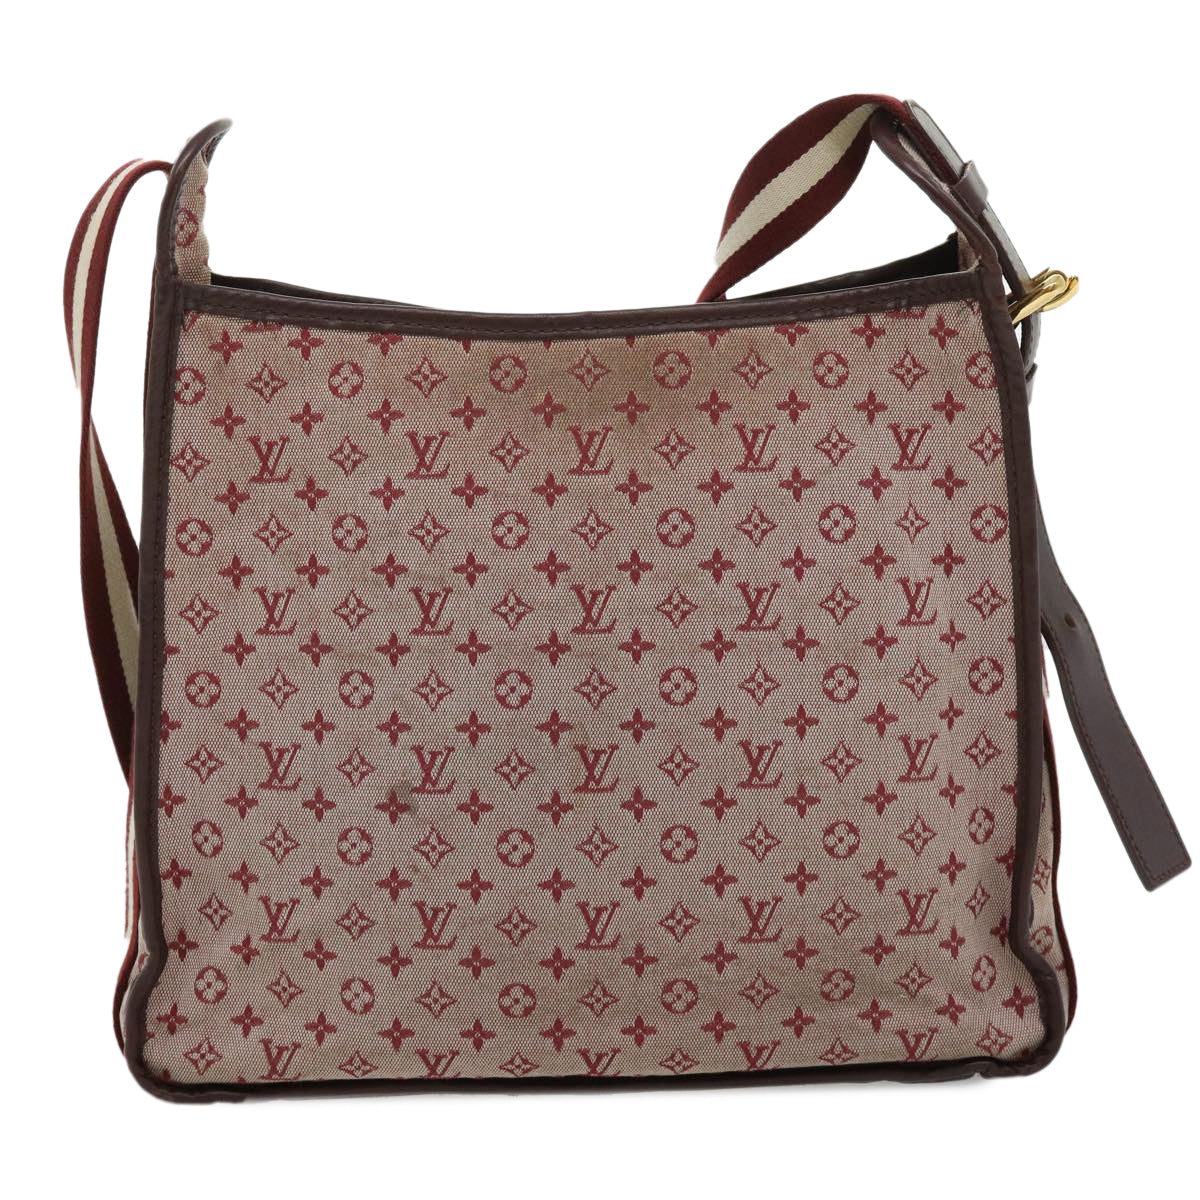 LOUIS VUITTON Monogram Mini Besace Mary Kate Shoulder Bag Red M92321 Auth bs2182 - 0